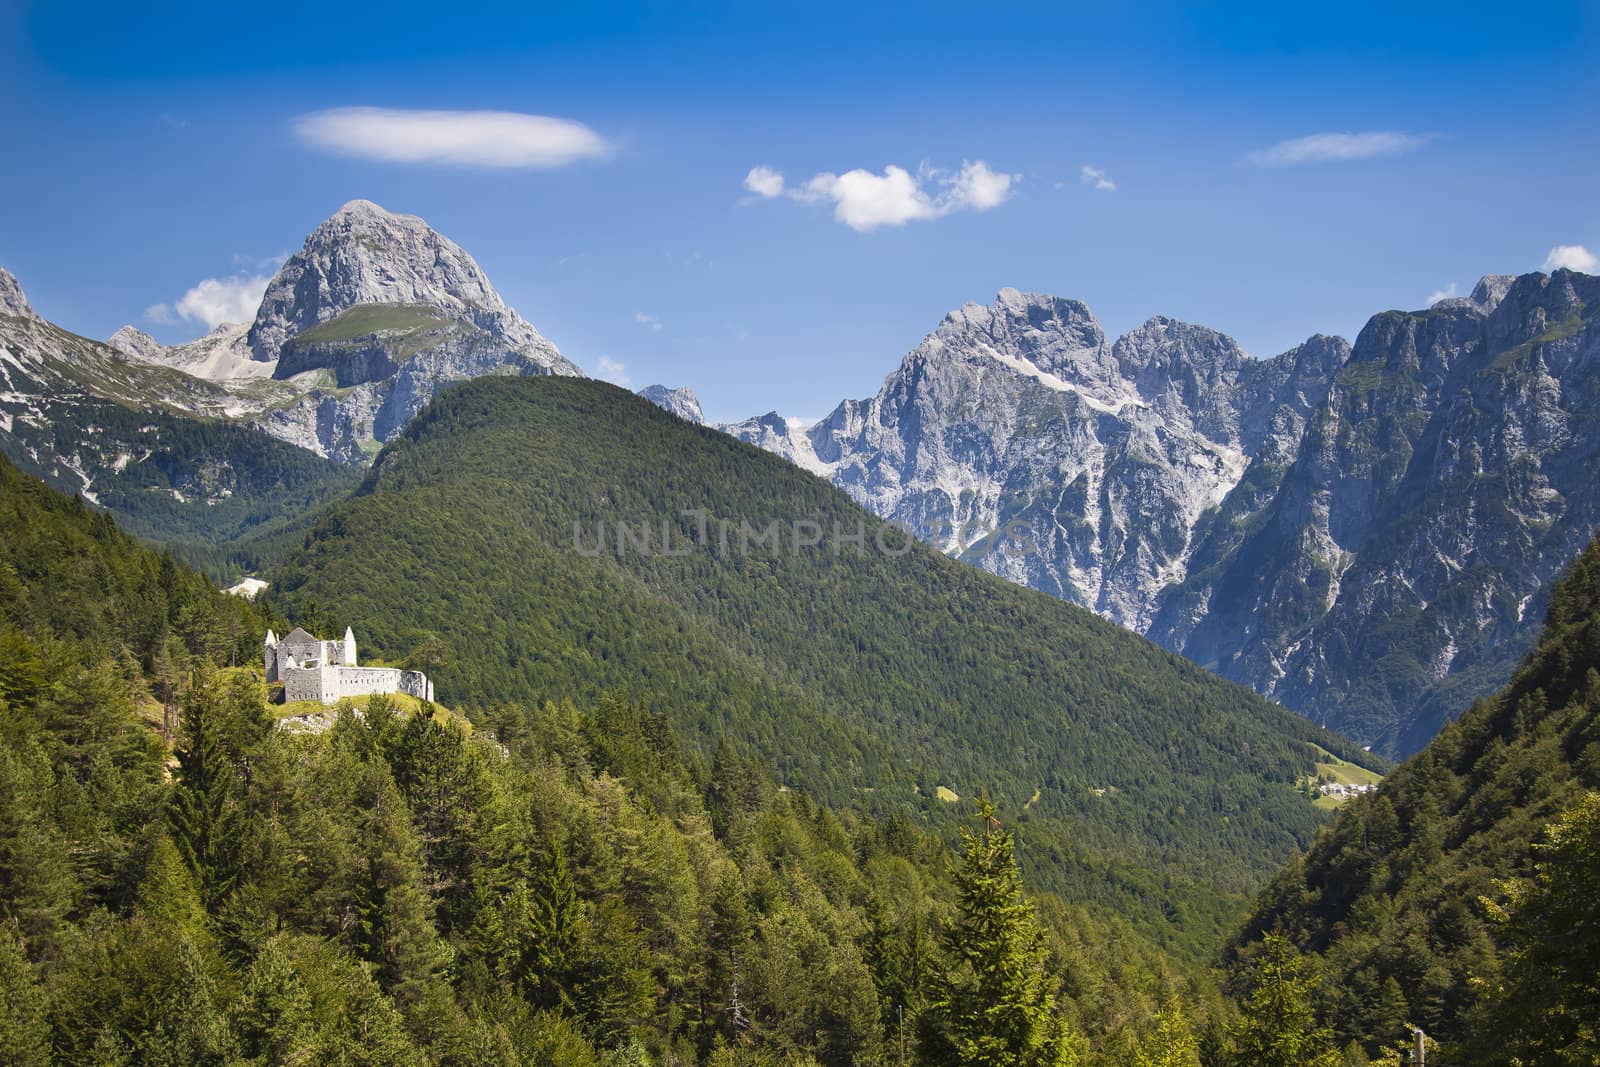 The Julian Alps in Slovenia are a mountain range of the Southern Limestone Alps